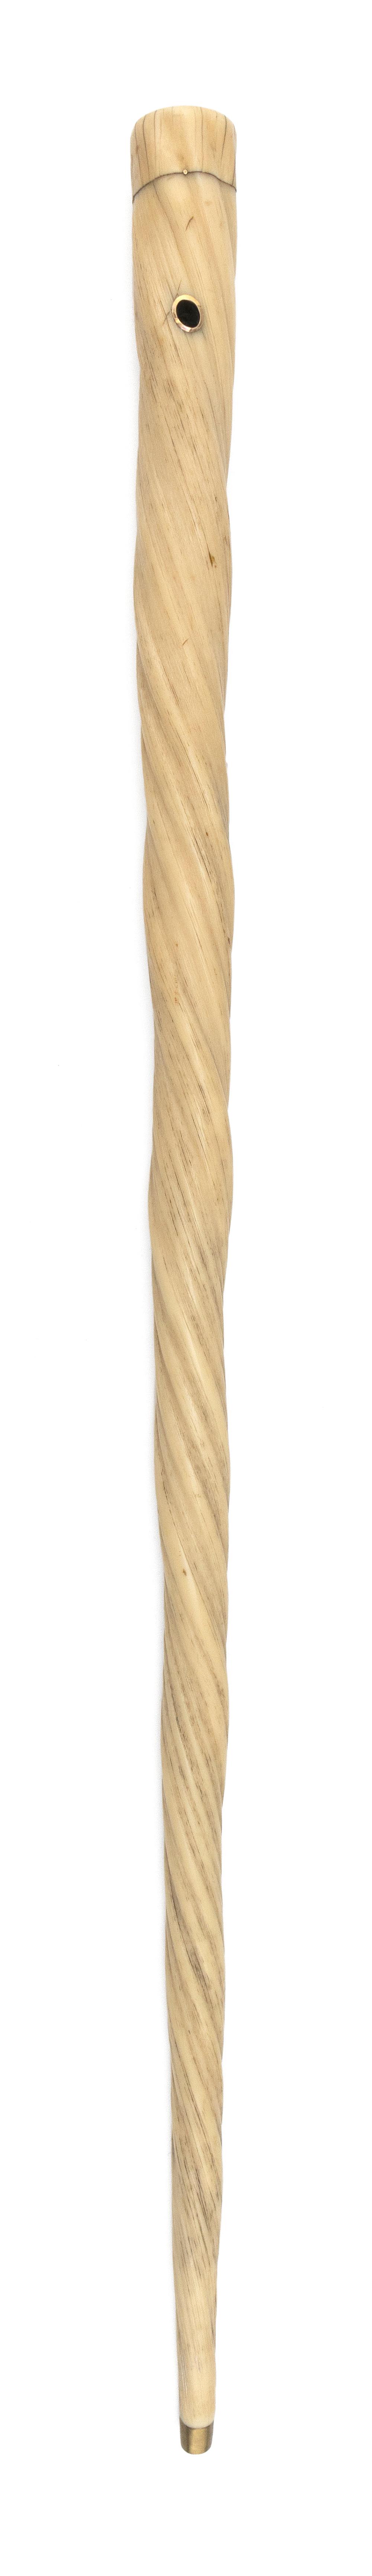 * NARWHAL TUSK CANE 19TH CENTURY